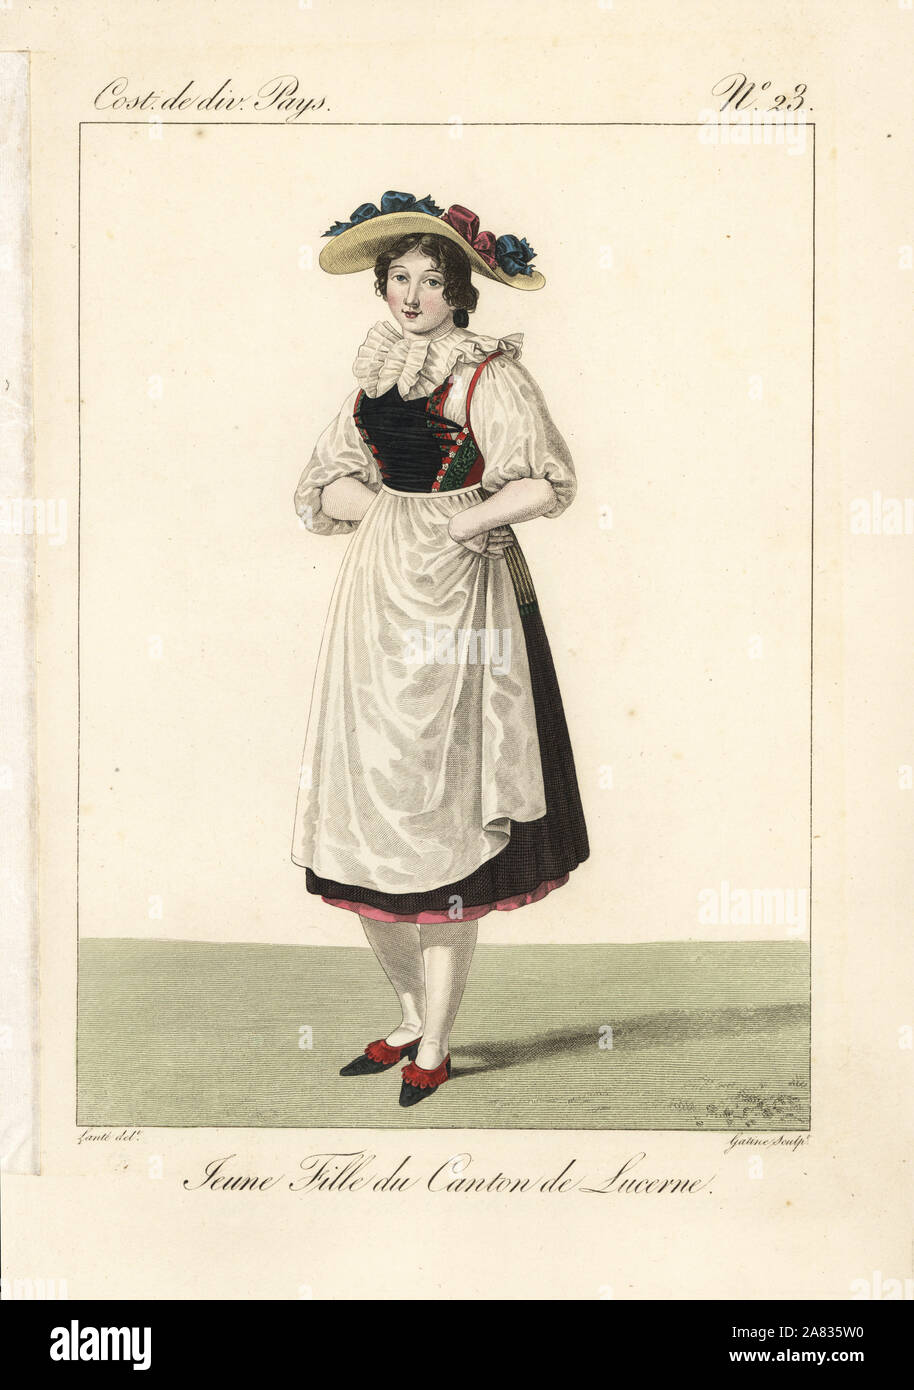 Girl of the Canton of Lucerne, Switzerland, 19th century. Her straw hat is decorated with ribbons and bows. She wears a ruff over a laced bodice, apron and short petticoats. Handcoloured copperplate engraving by Georges Jacques Gatine after an illustration by Louis Marie Lante from Costumes of Various Countries, Costumes de Divers Pays, Paris, 1827. Stock Photo